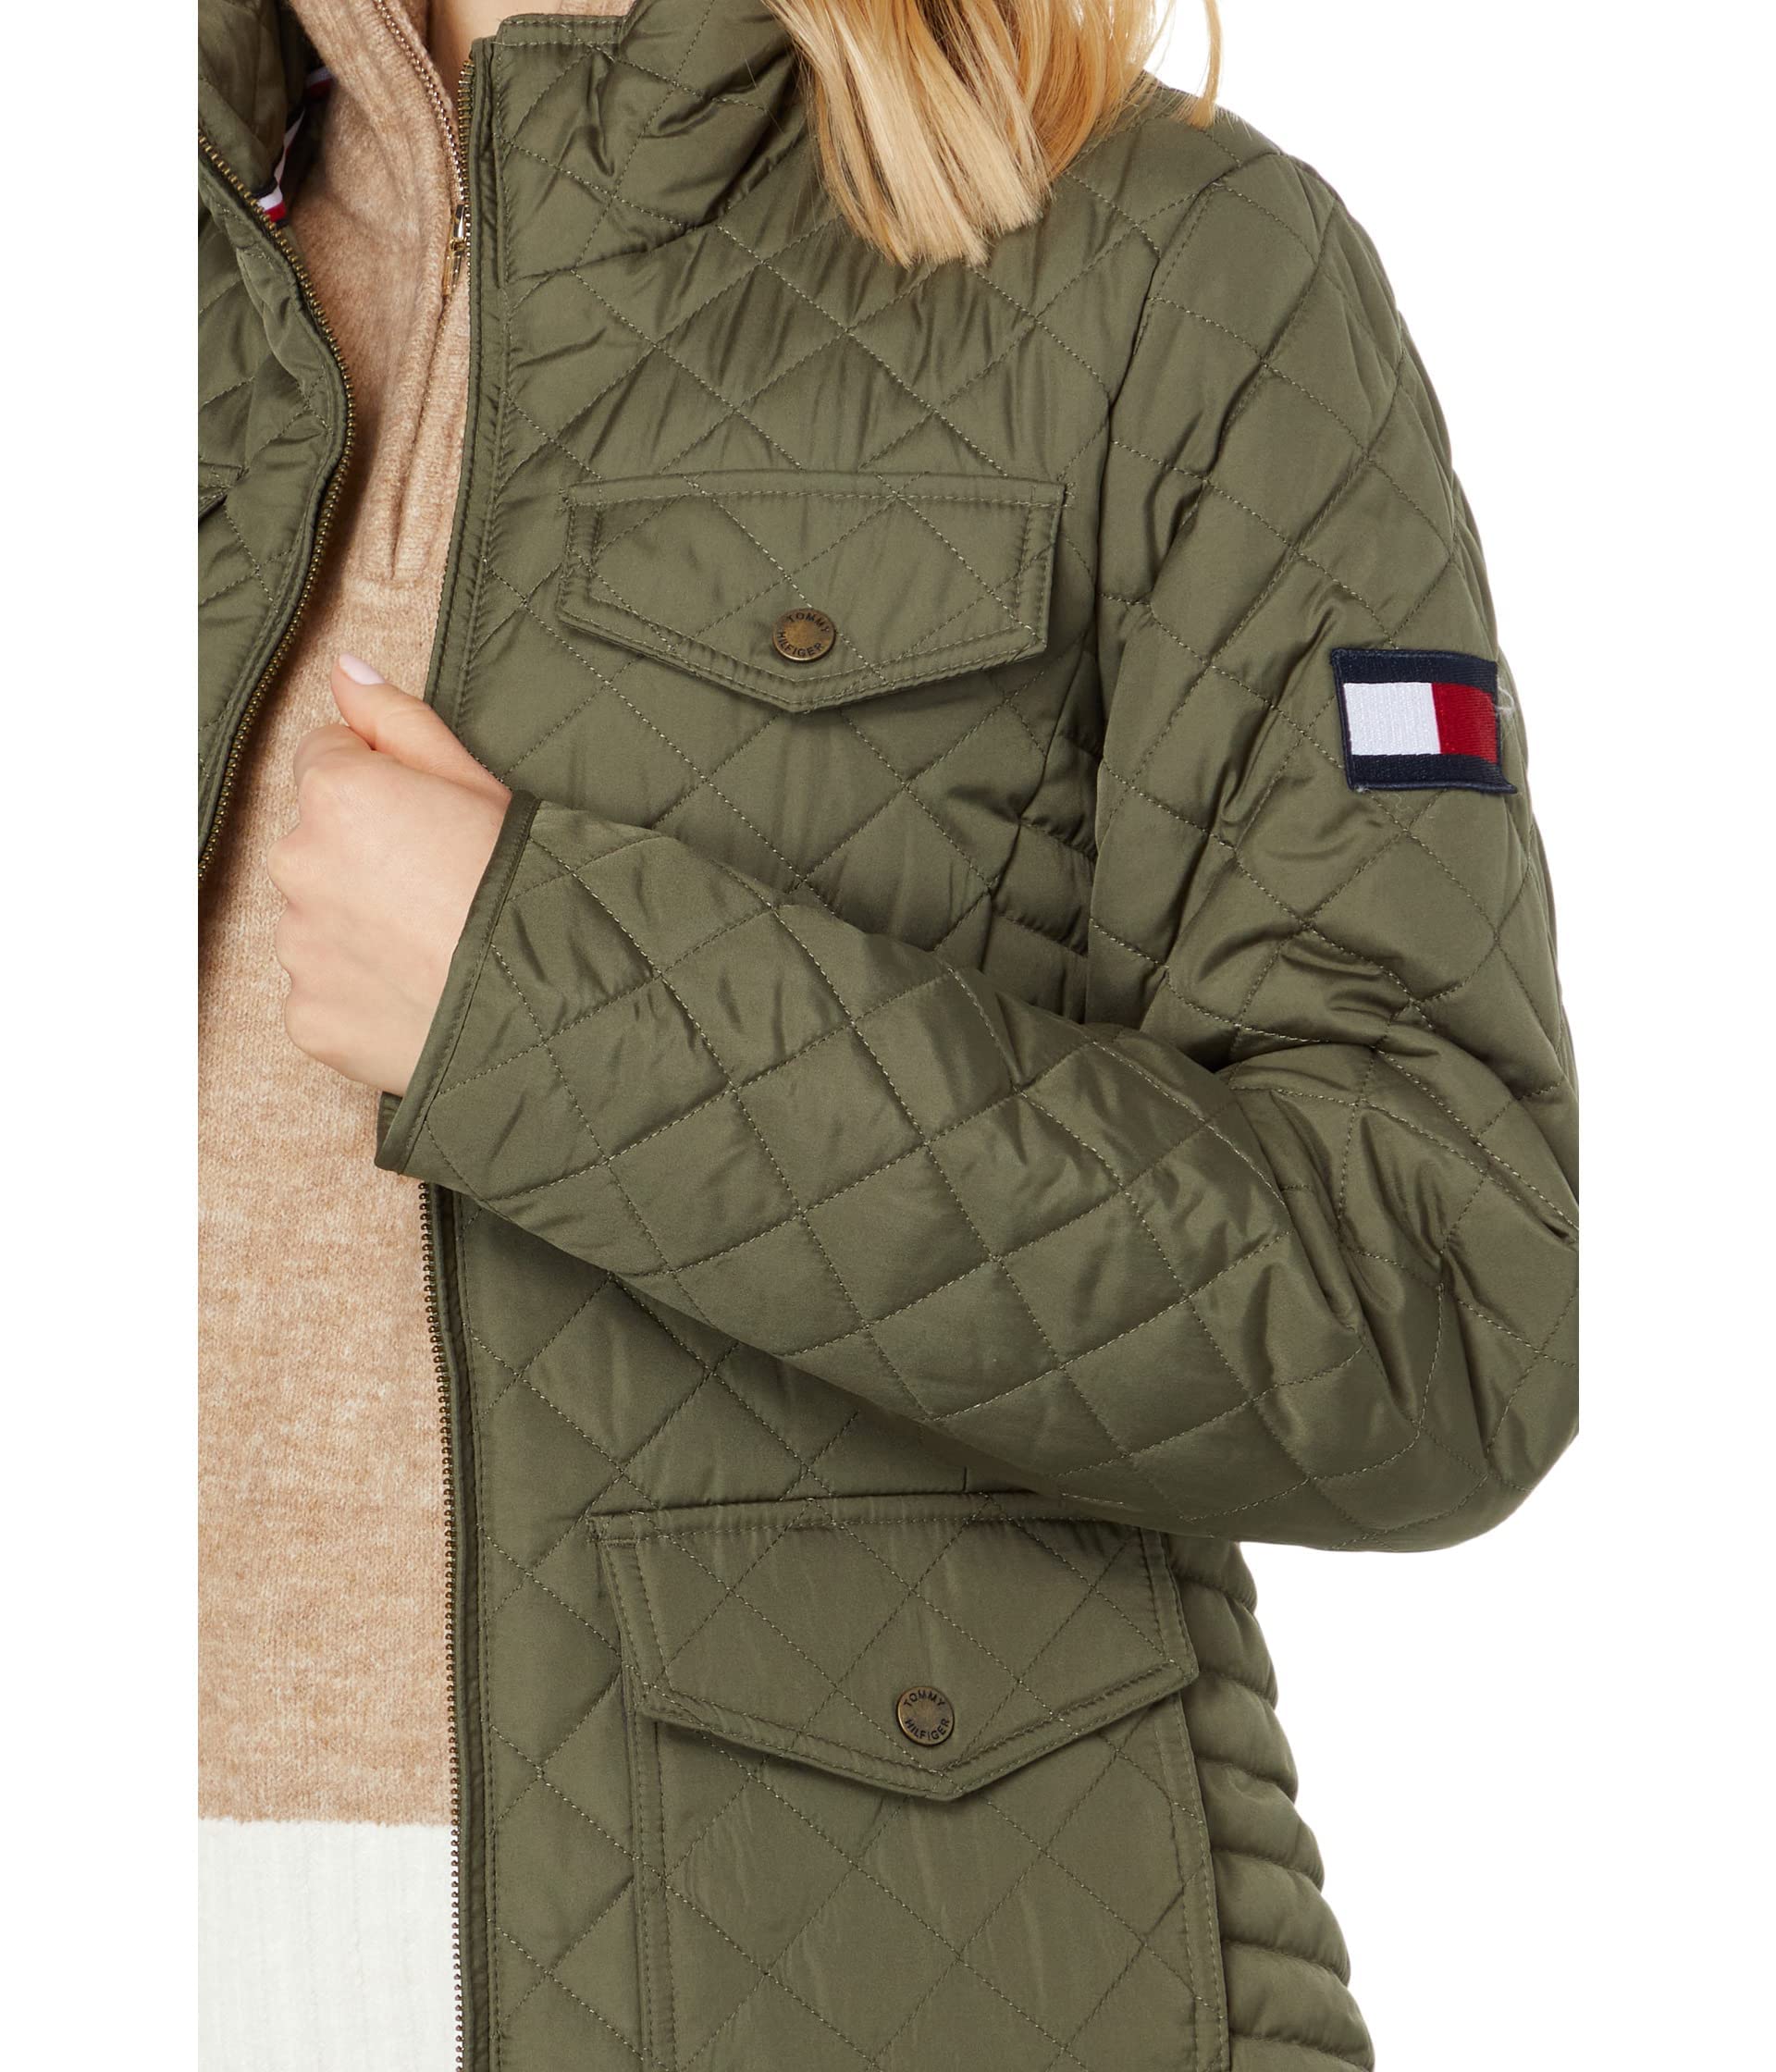 Tommy Hilfiger Quilted Fall Fashion, Lightweight Jacket Women